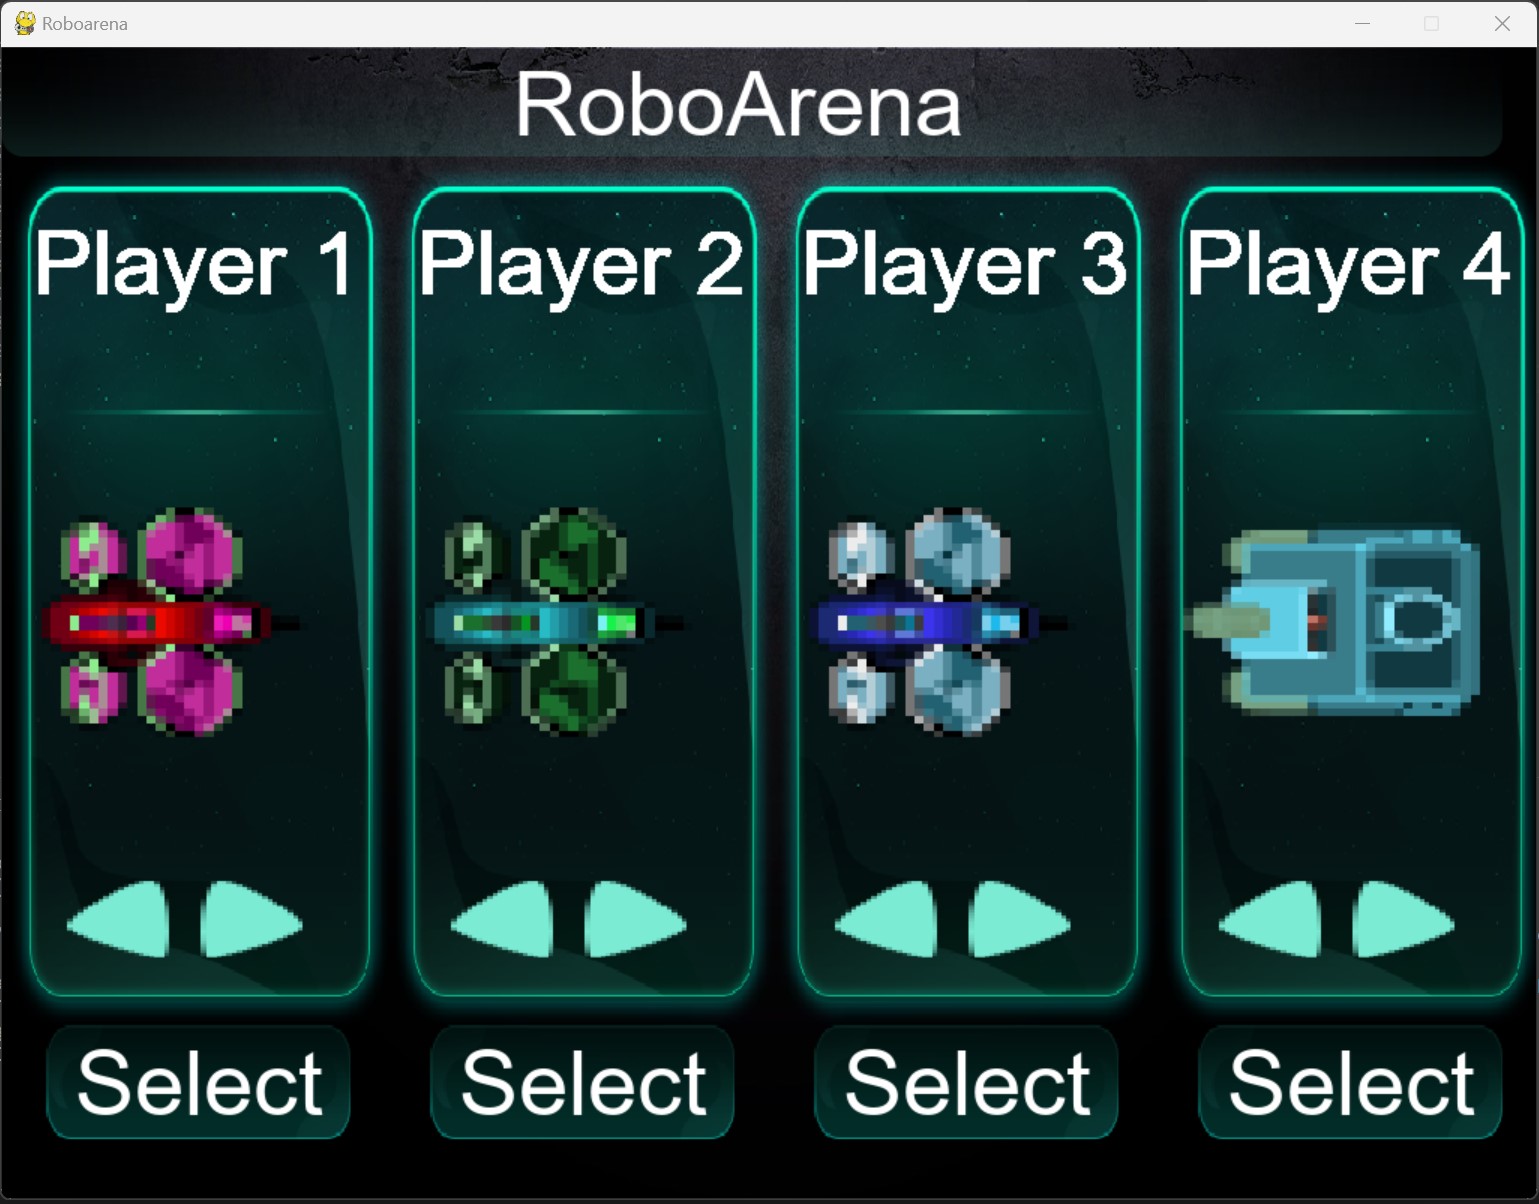 Player selection screen